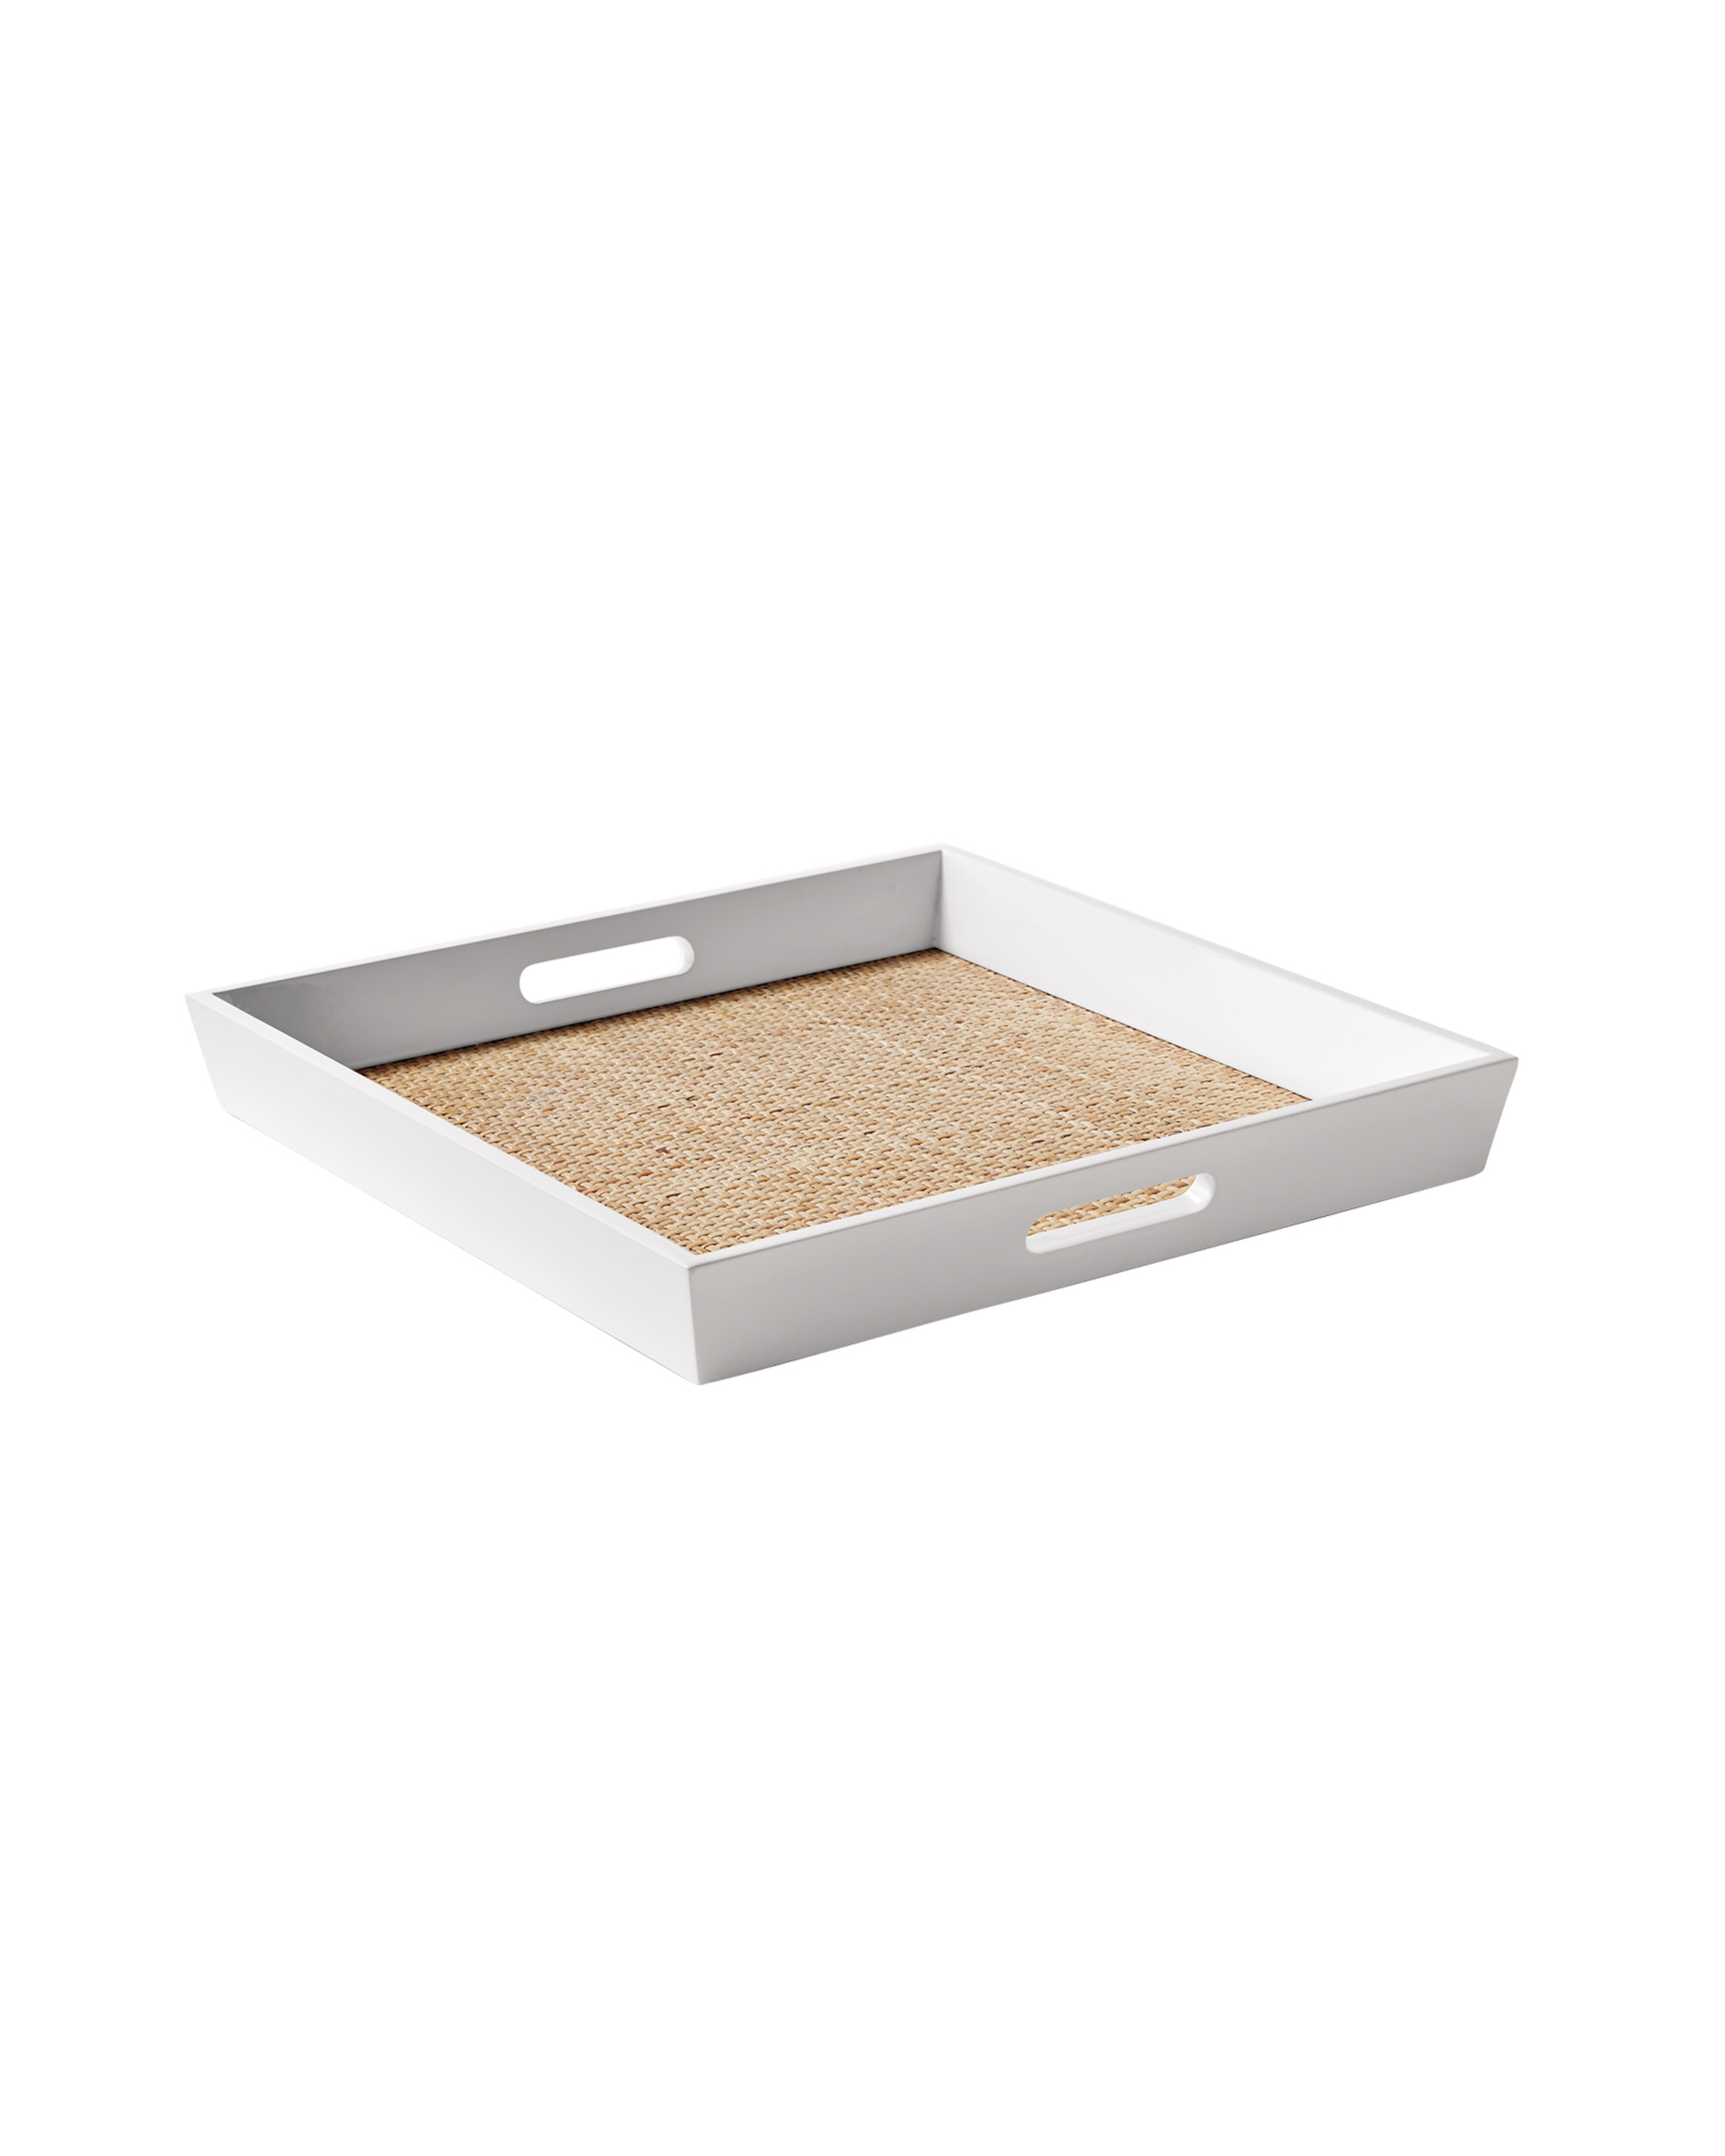 Lacquer Rattan Tray - White, 20" - Serena and Lily